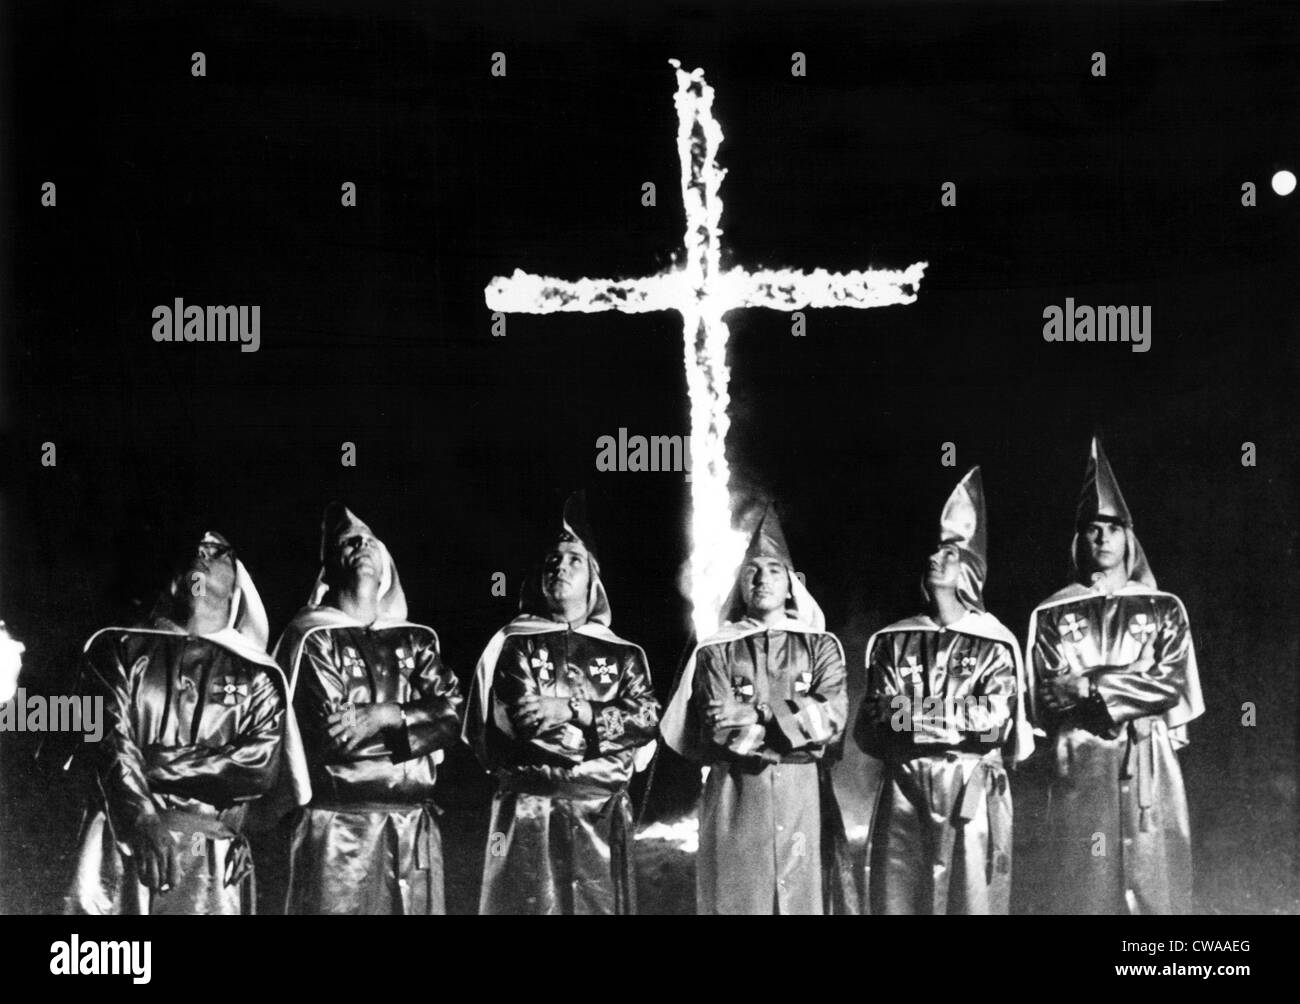 9/5/71--STONE MOUNTAIN, GA: Six unidentified Ku Klux Klan members in front of the traditional burning cross at a rally billed Stock Photo